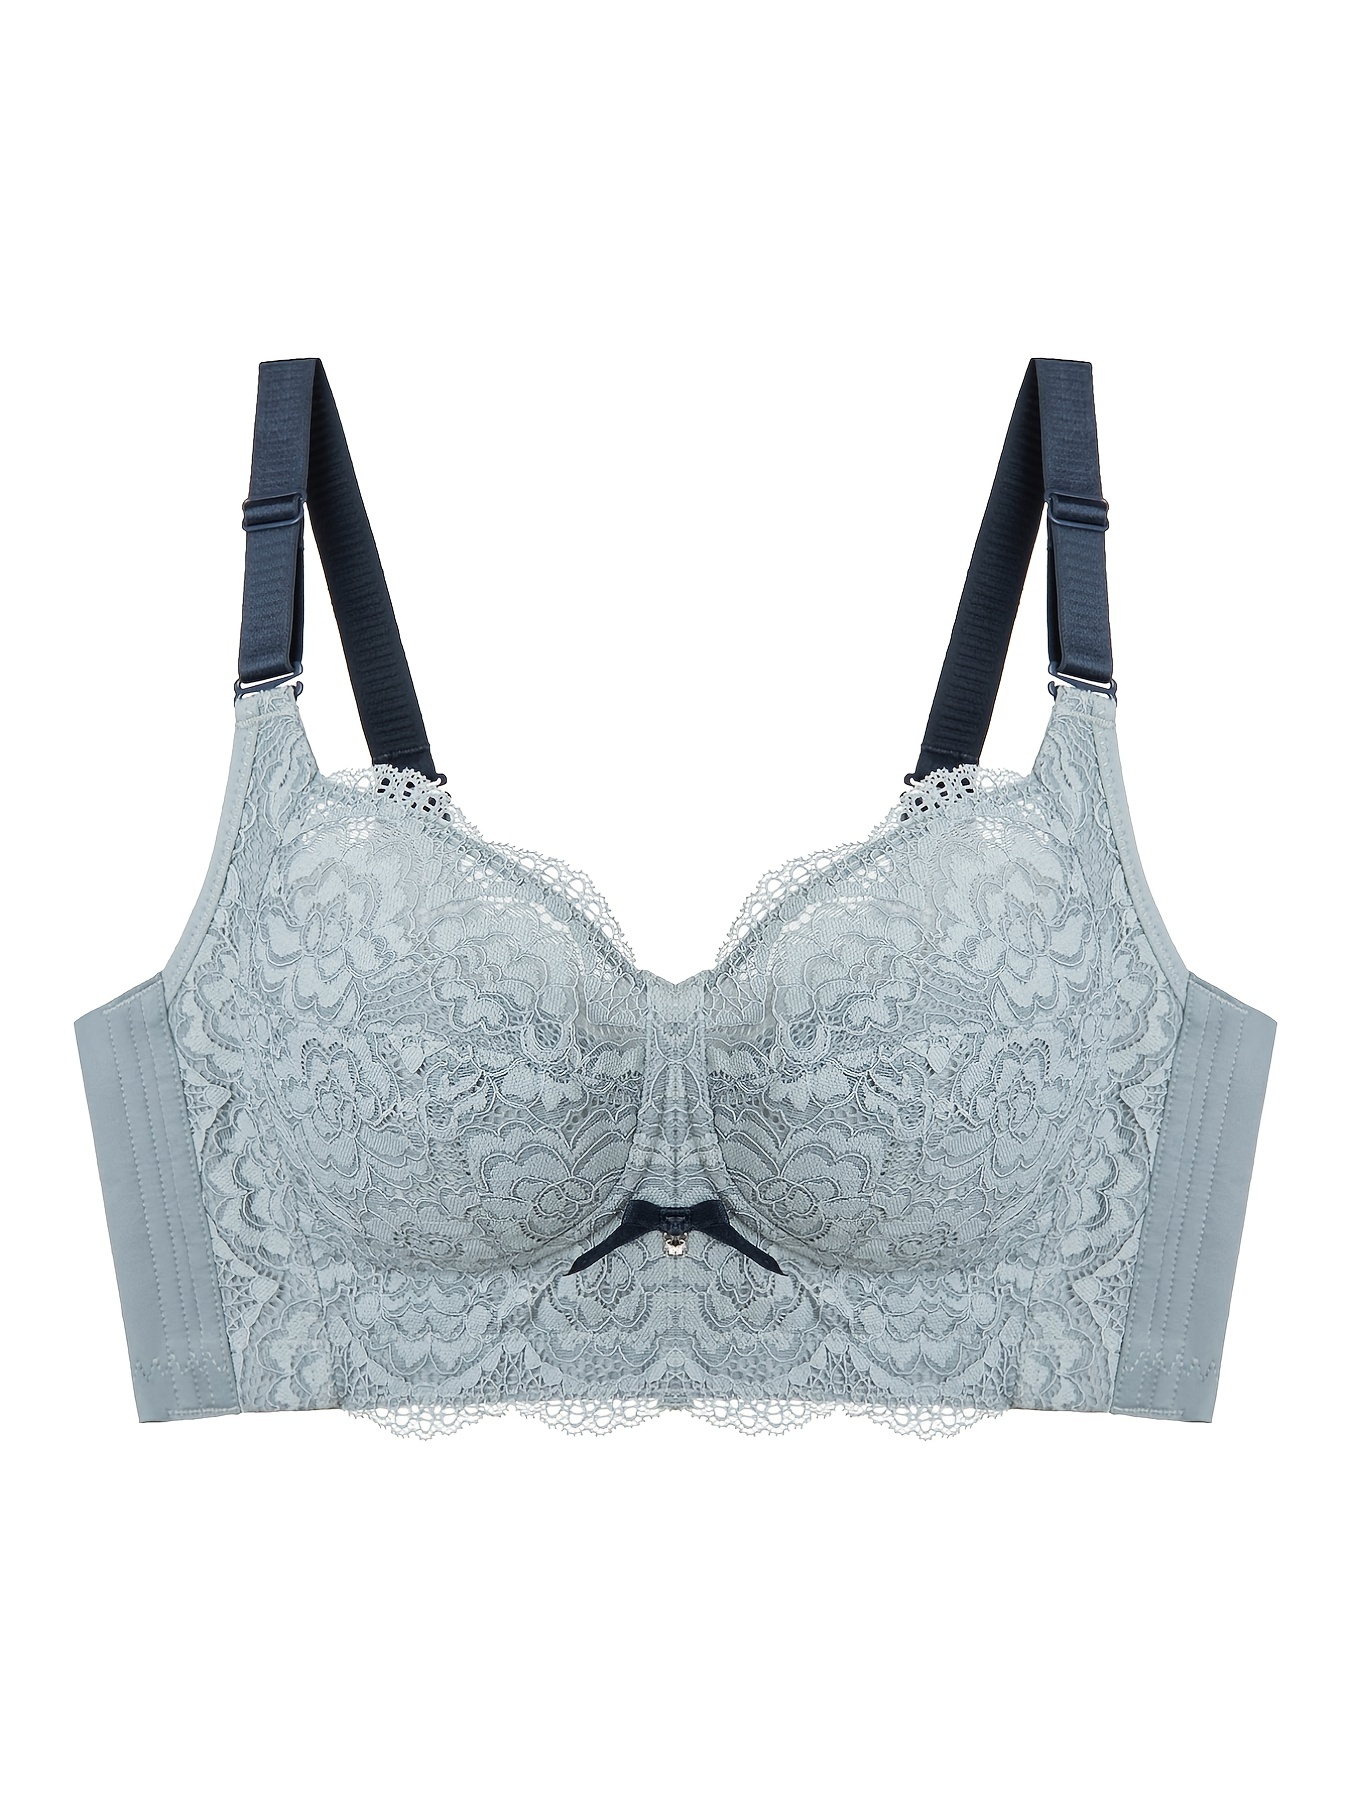 BKEssentials Floral Lace Full Coverage Bralette - Women's Intimates in Grey  Blue